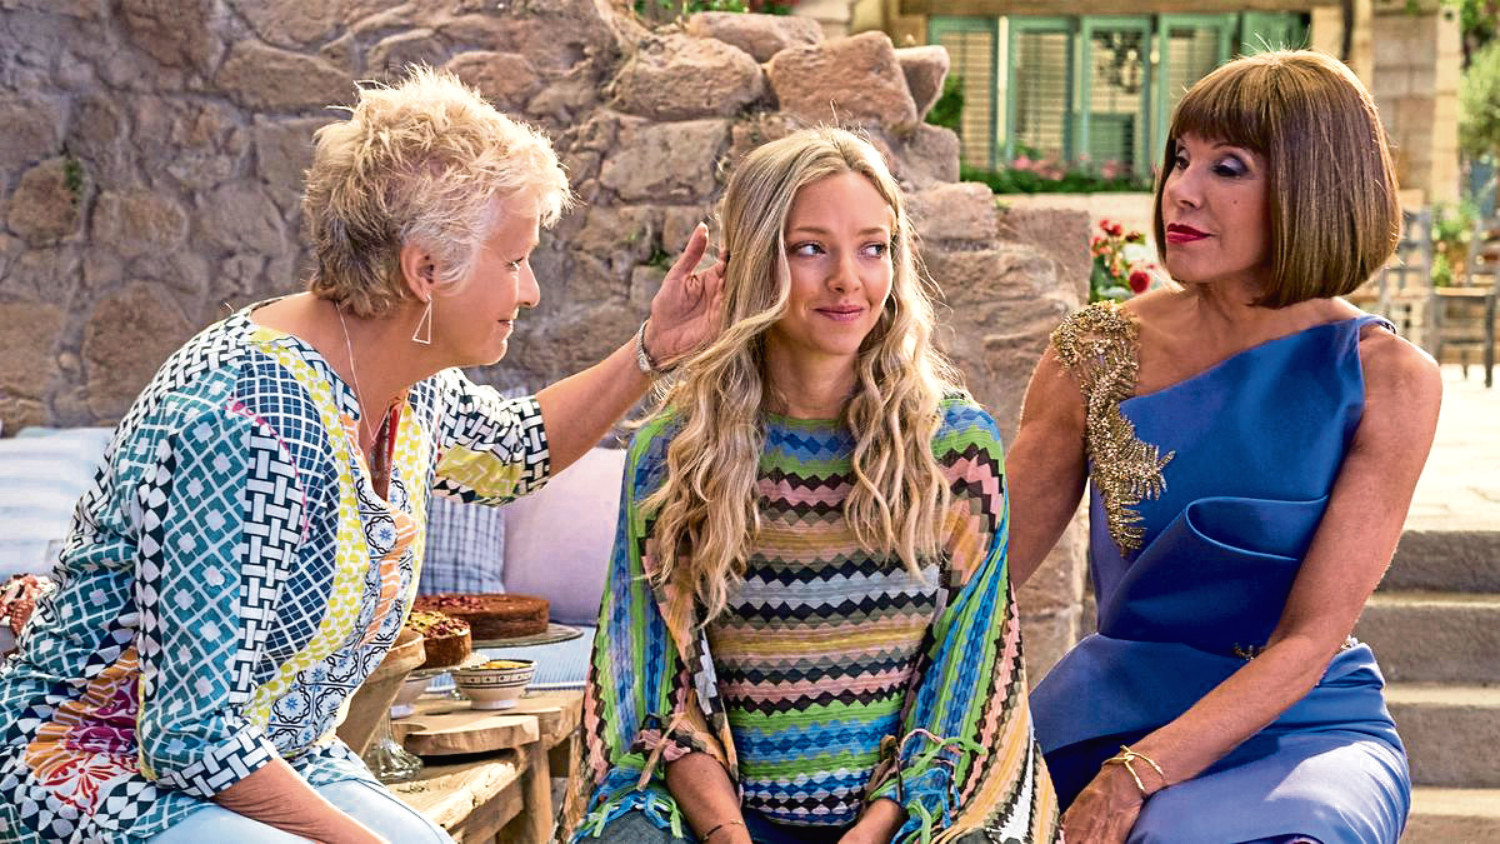 Ross King wants more musicals like Mamma Mia